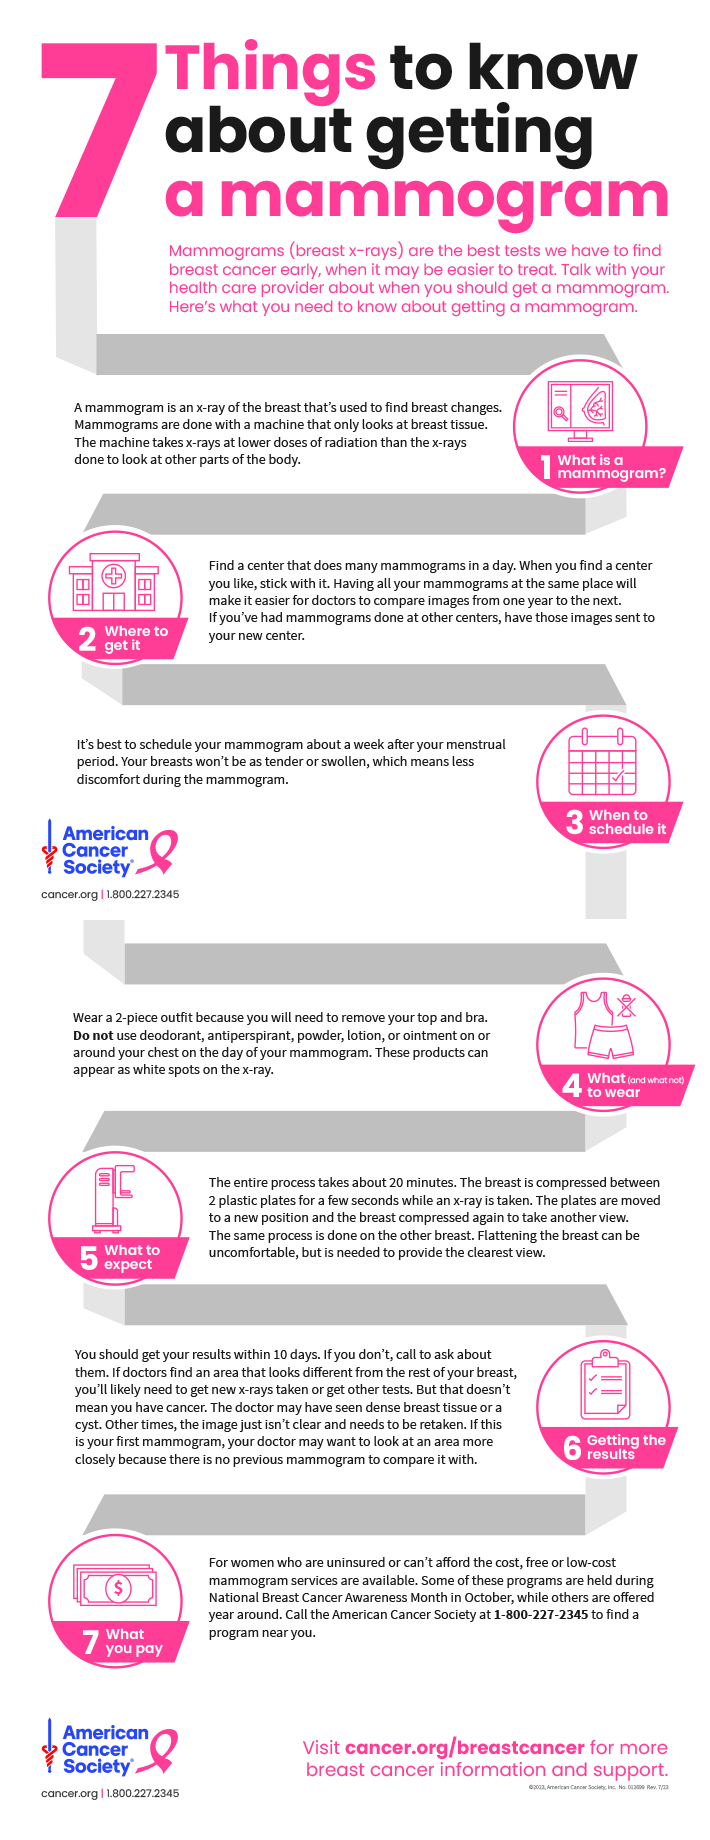 Infographic: 7 Things to Know About Getting a Mammogram